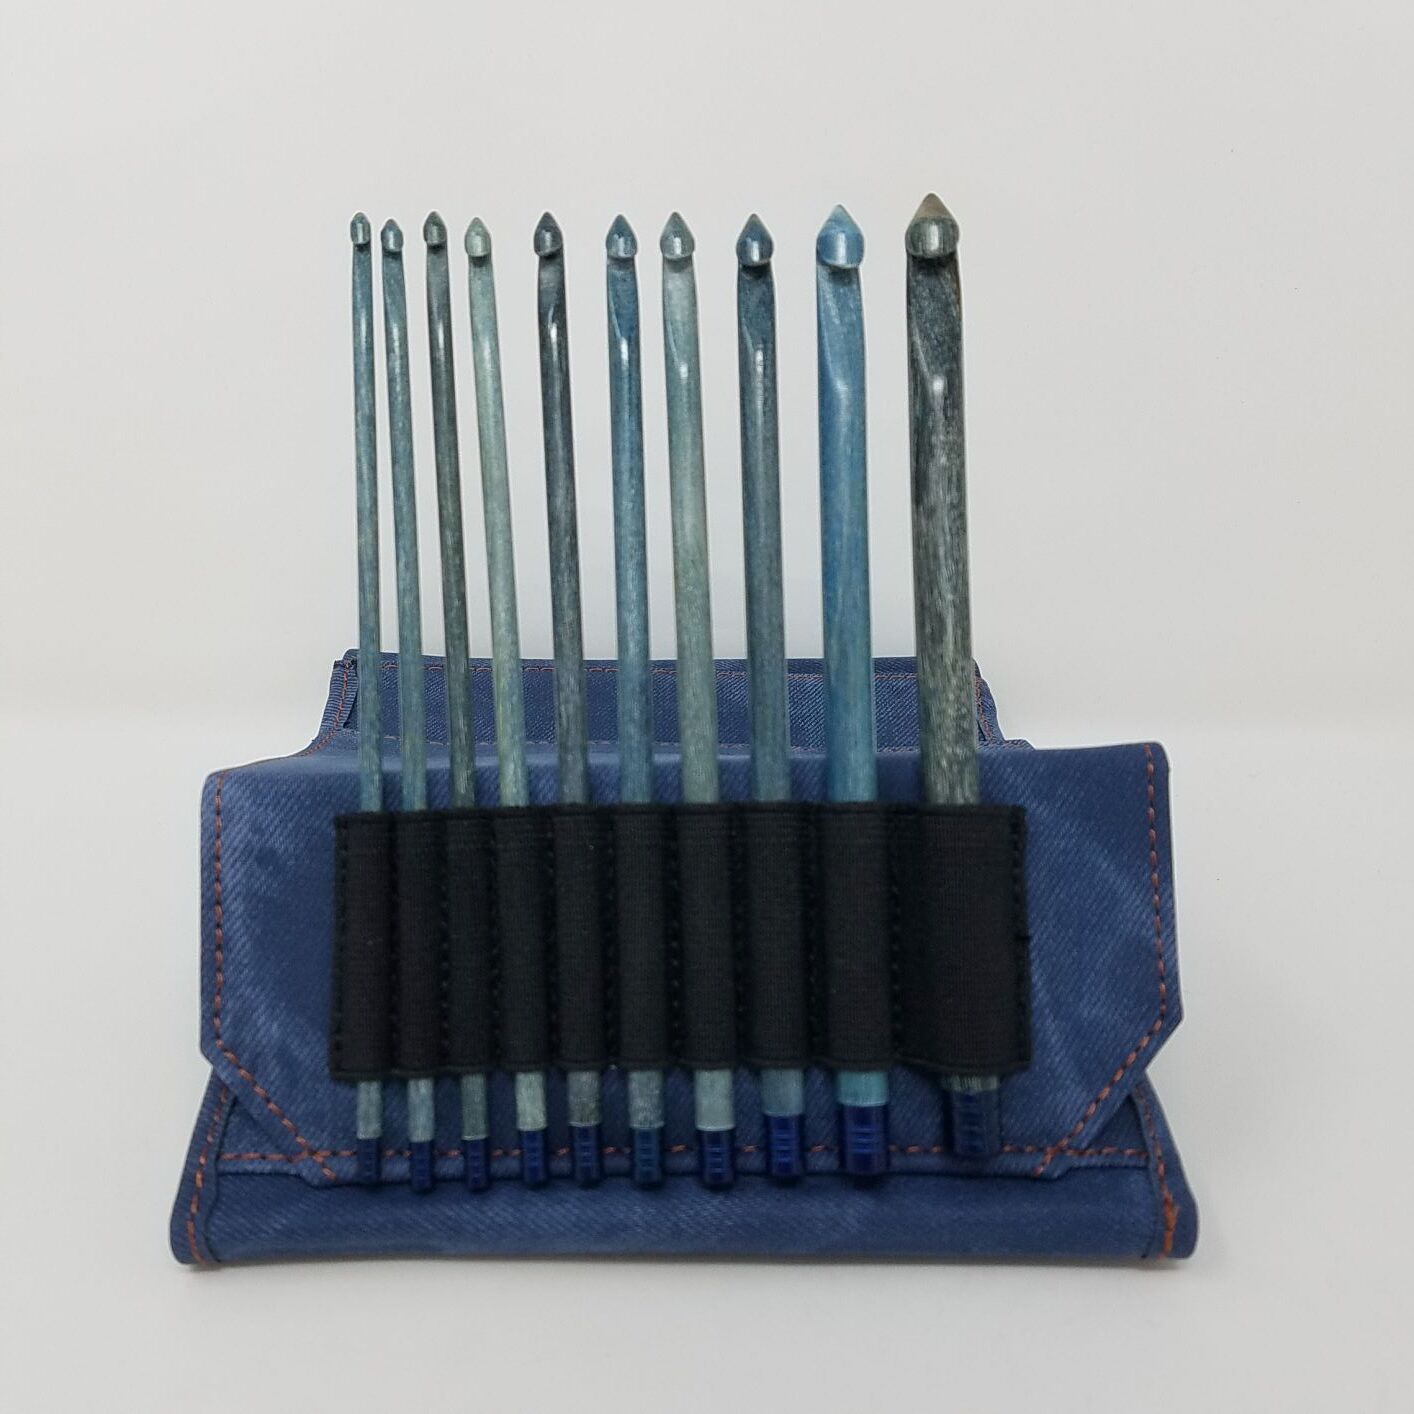 Knitting Needles and Crochet Hooks on Display in a Craft Store